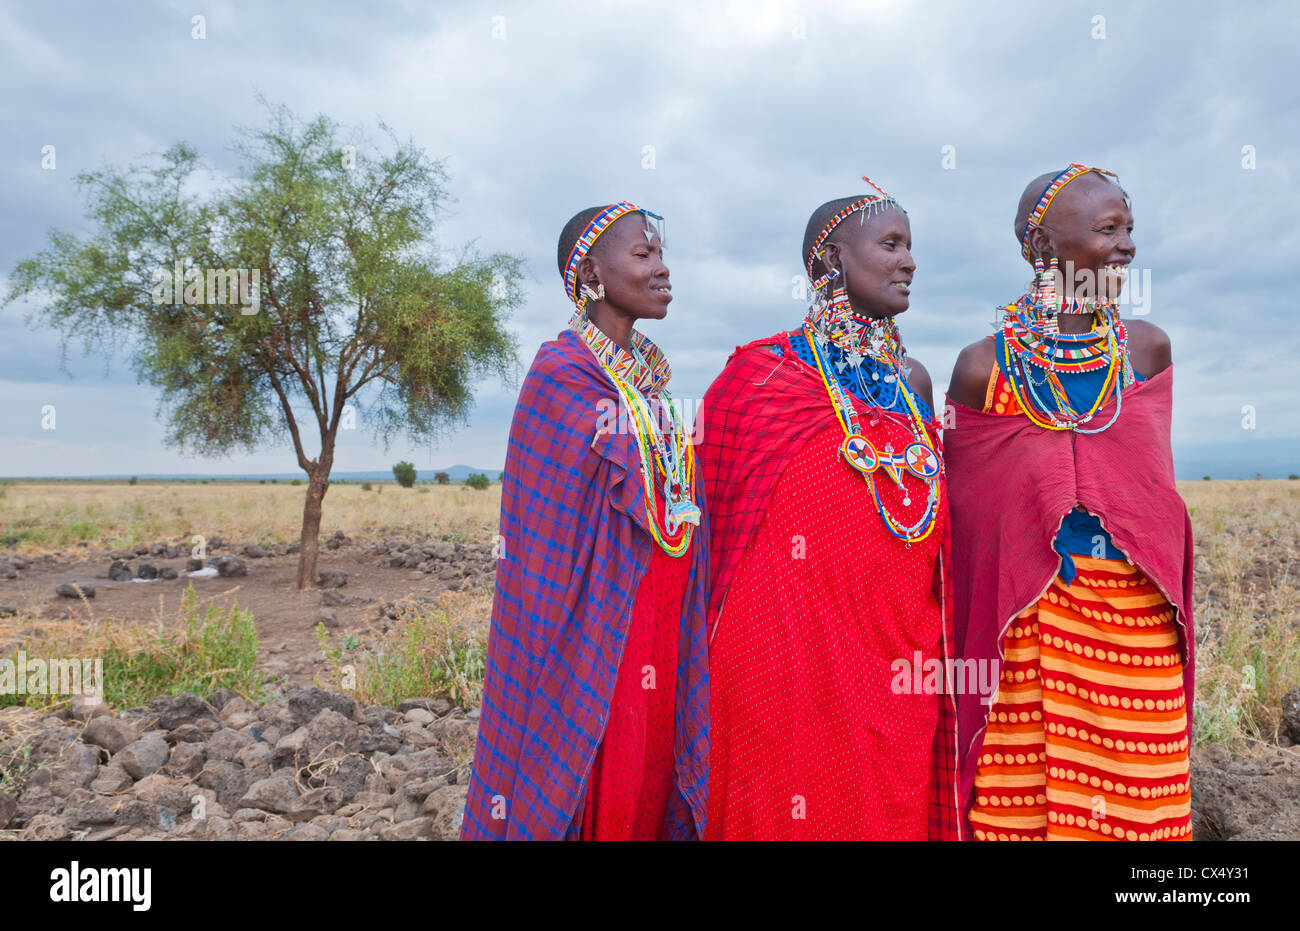 Kenya Africa Amboseli Maasai tribe village Masai women in red costume dress and beads and tree in remote area #1 Stock Photo